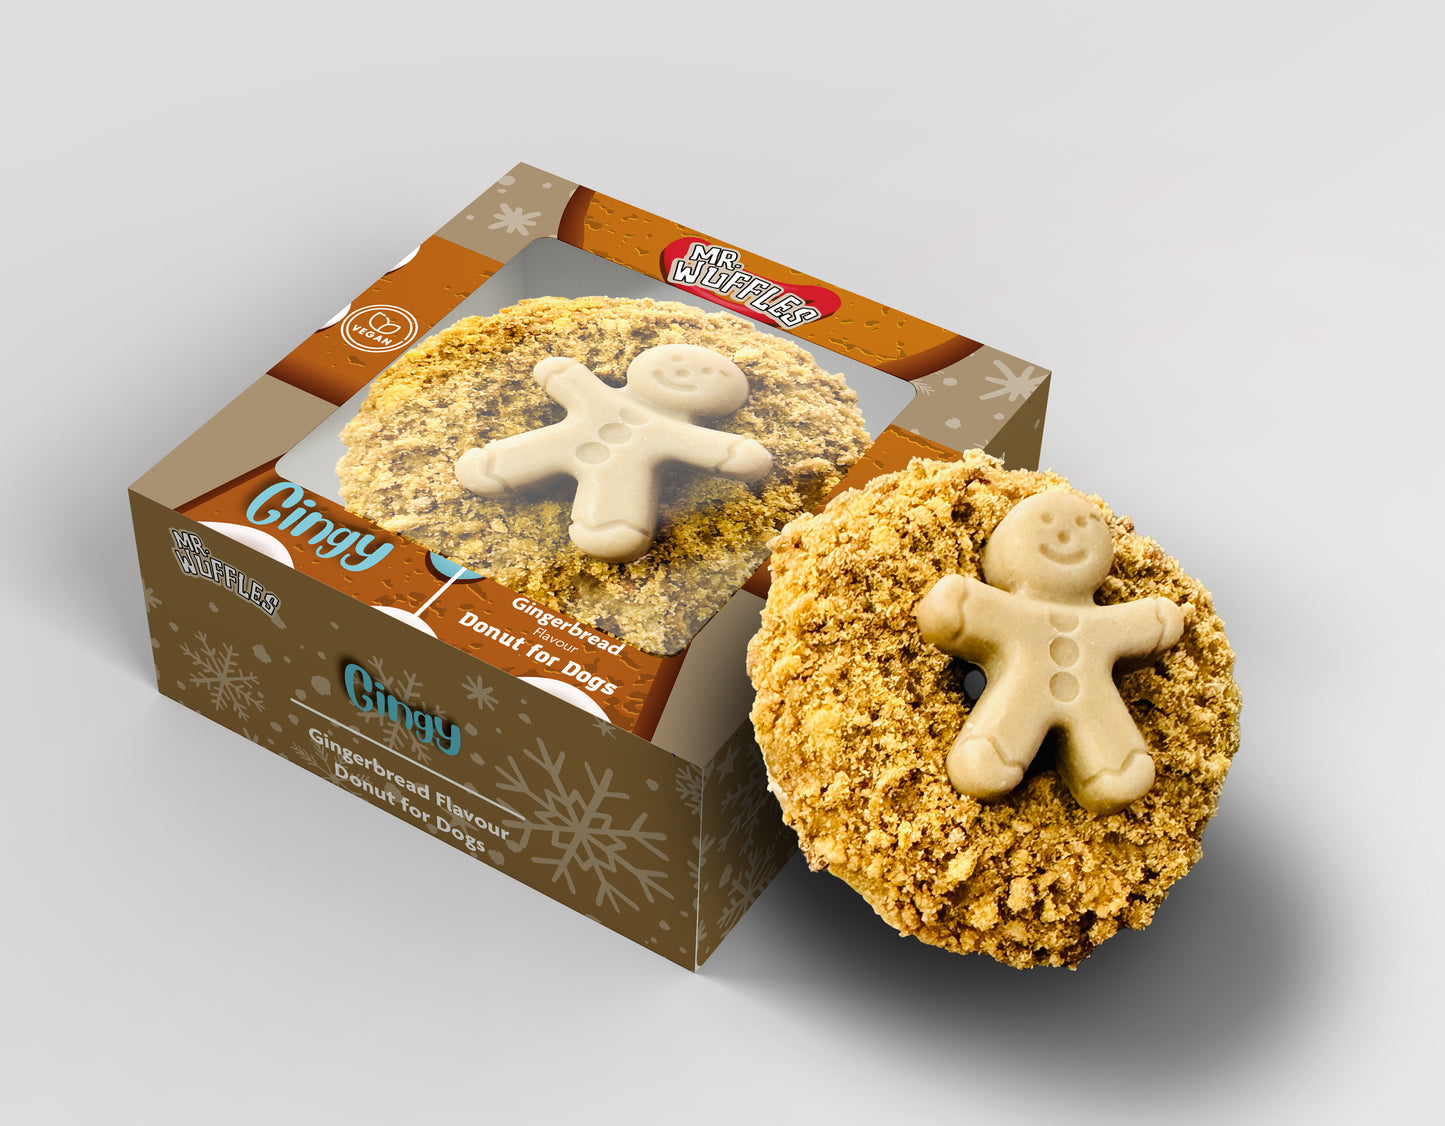 Christmas Gingy Boxed Dog Donut Treat - Gingerbread Flavour